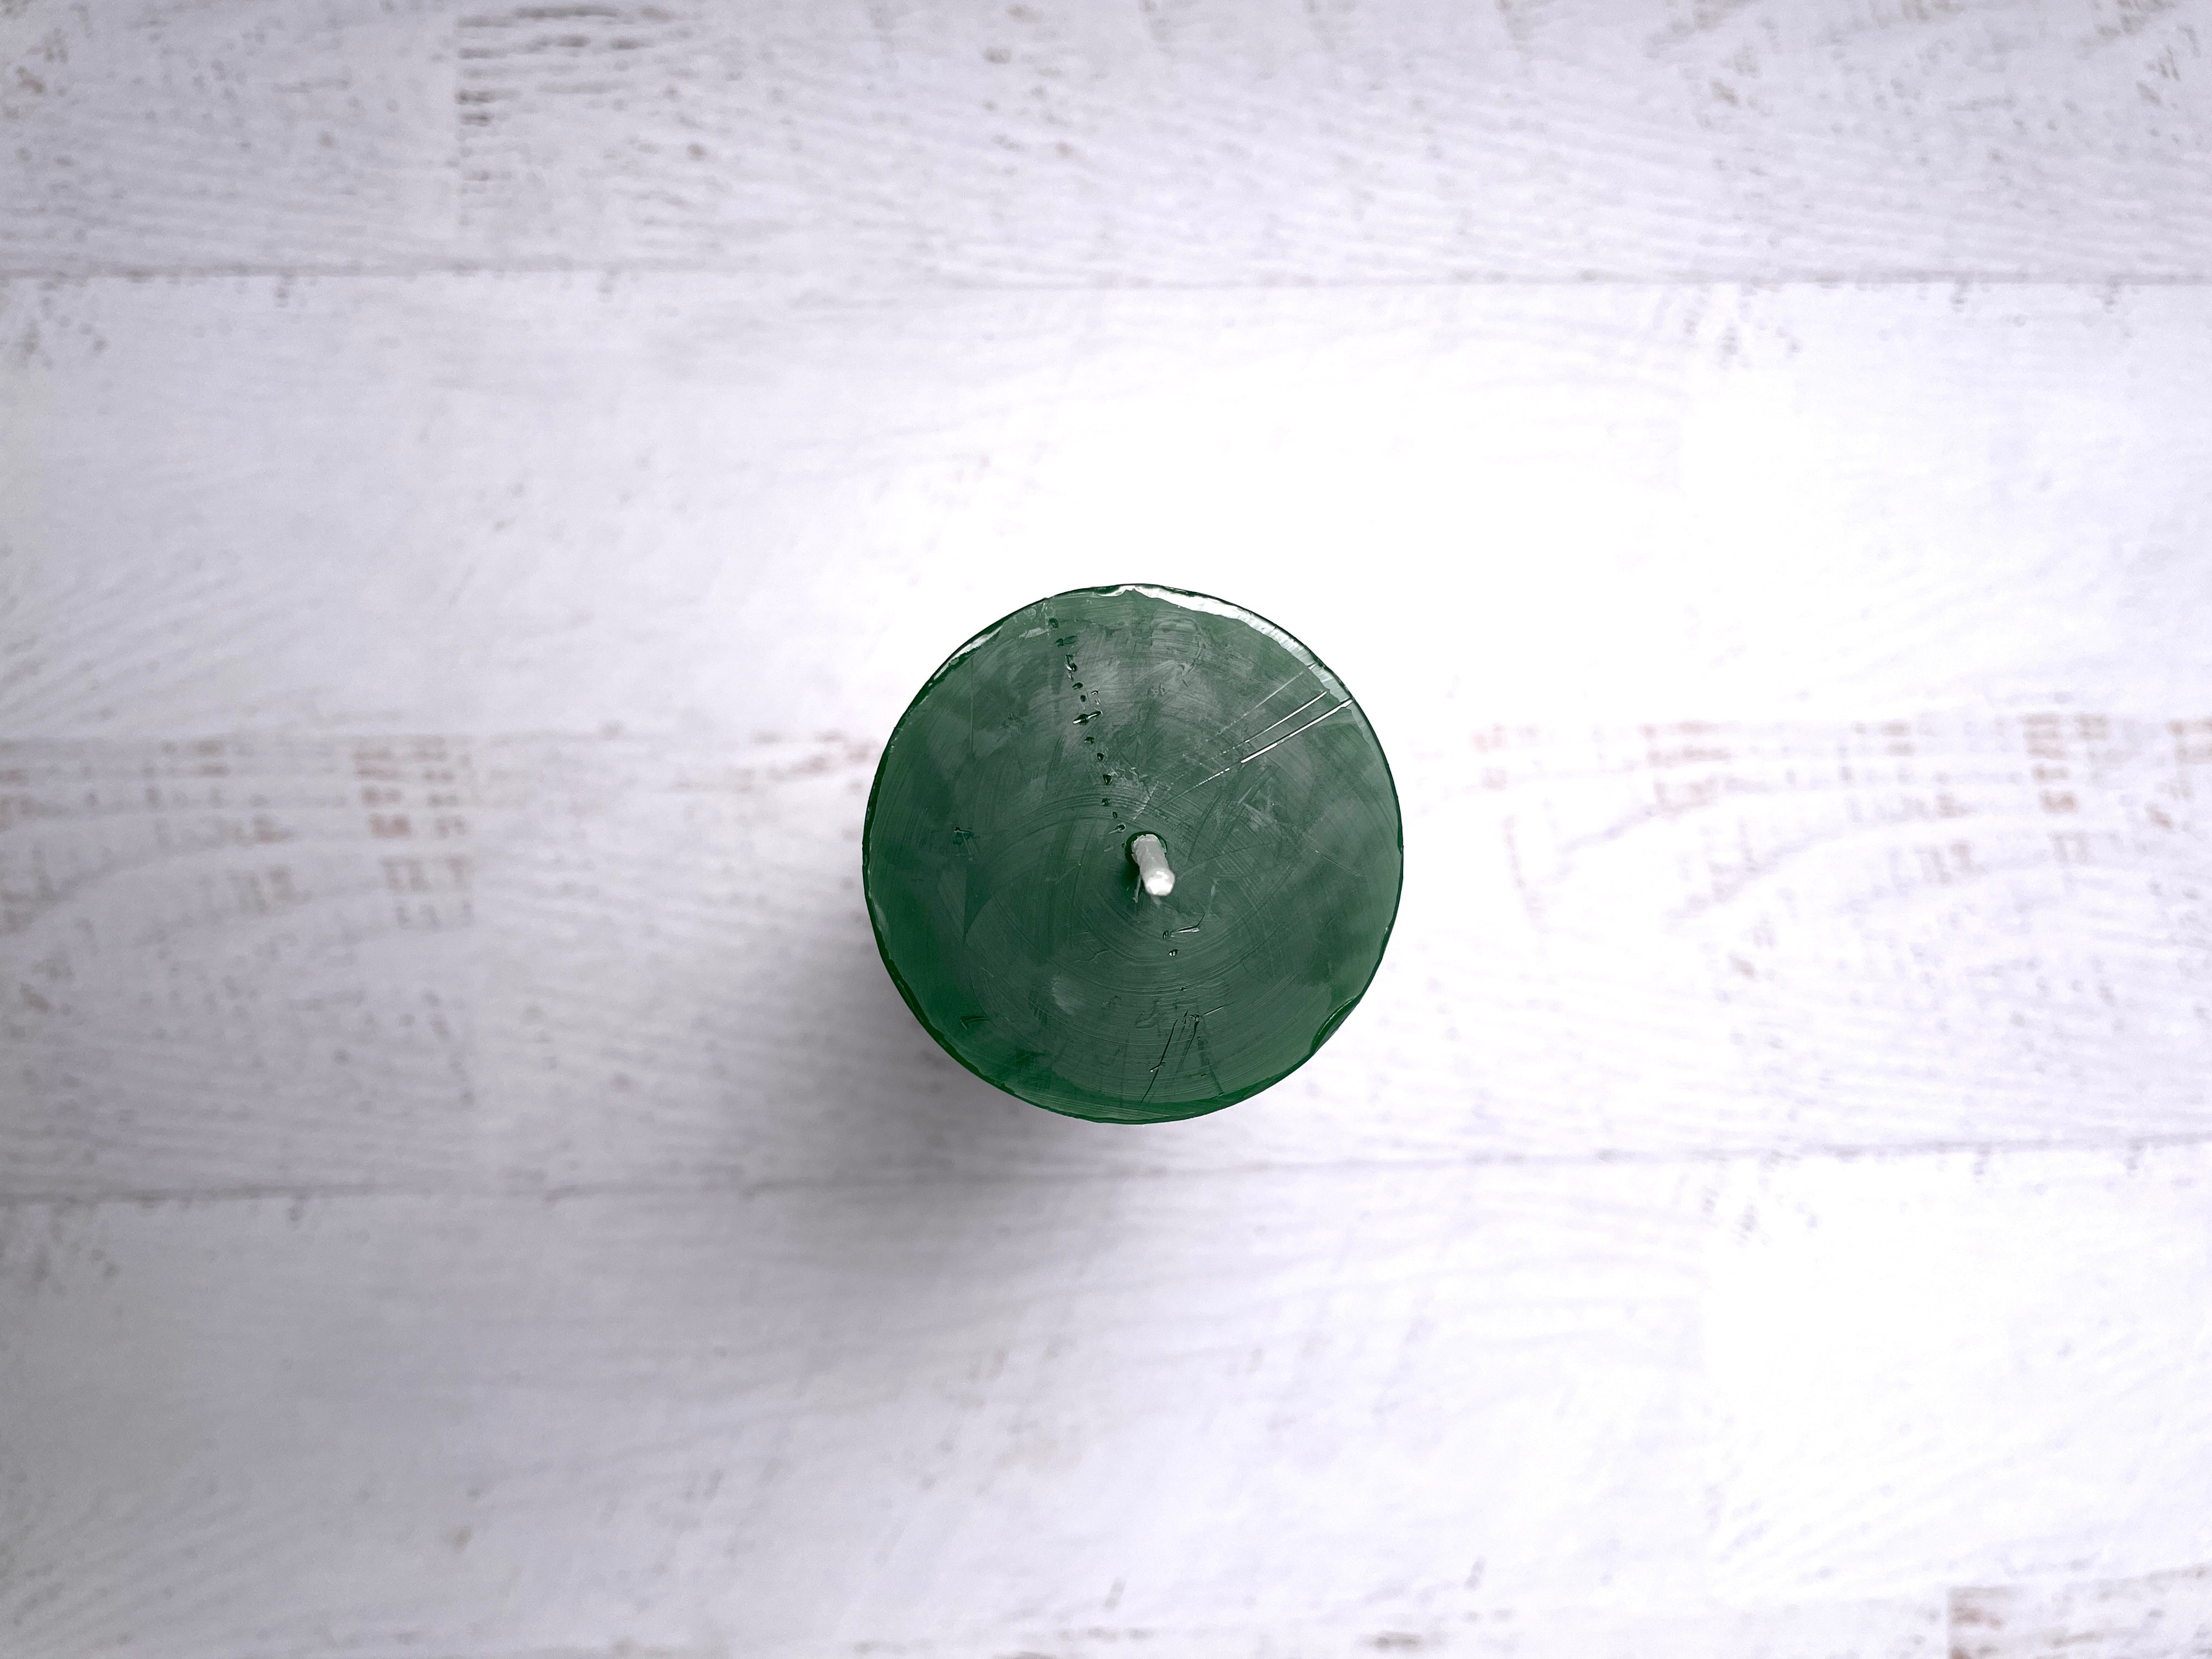 Buy Online Latest and Unique Green Pillar Candle 2" x 6" Inch, Prosperity, Money, Abundance Wealth, Luck | Shop Best Spiritual Items - The Mystical Ritual